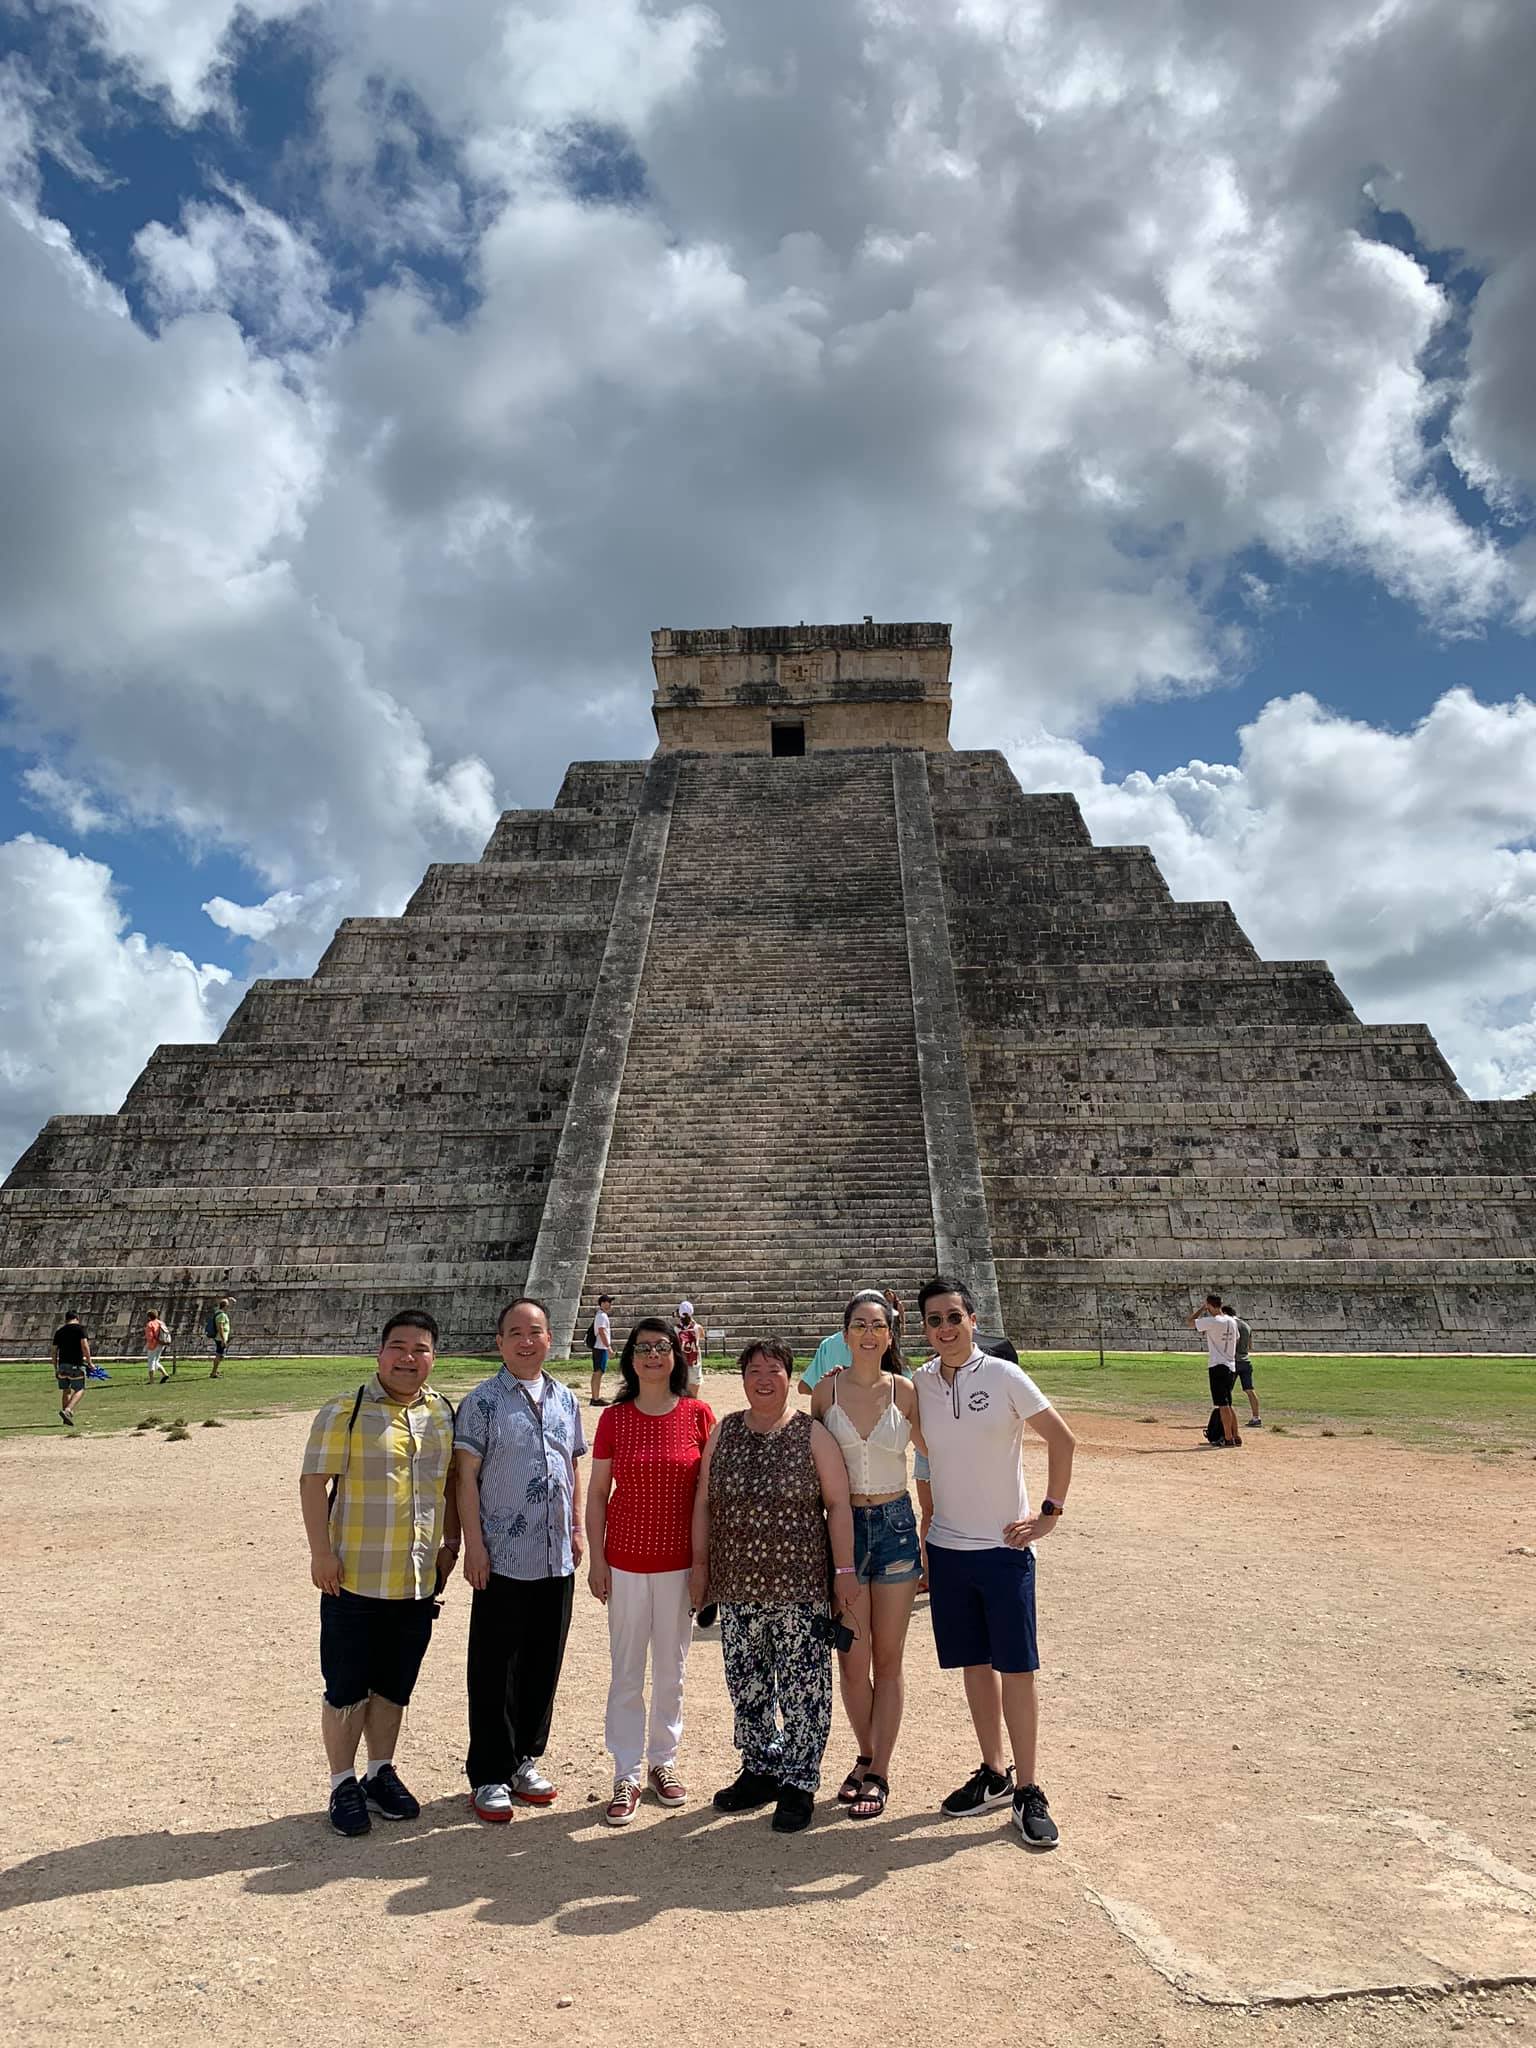 Chen (left) with his family at Chichén Itzá, 2019